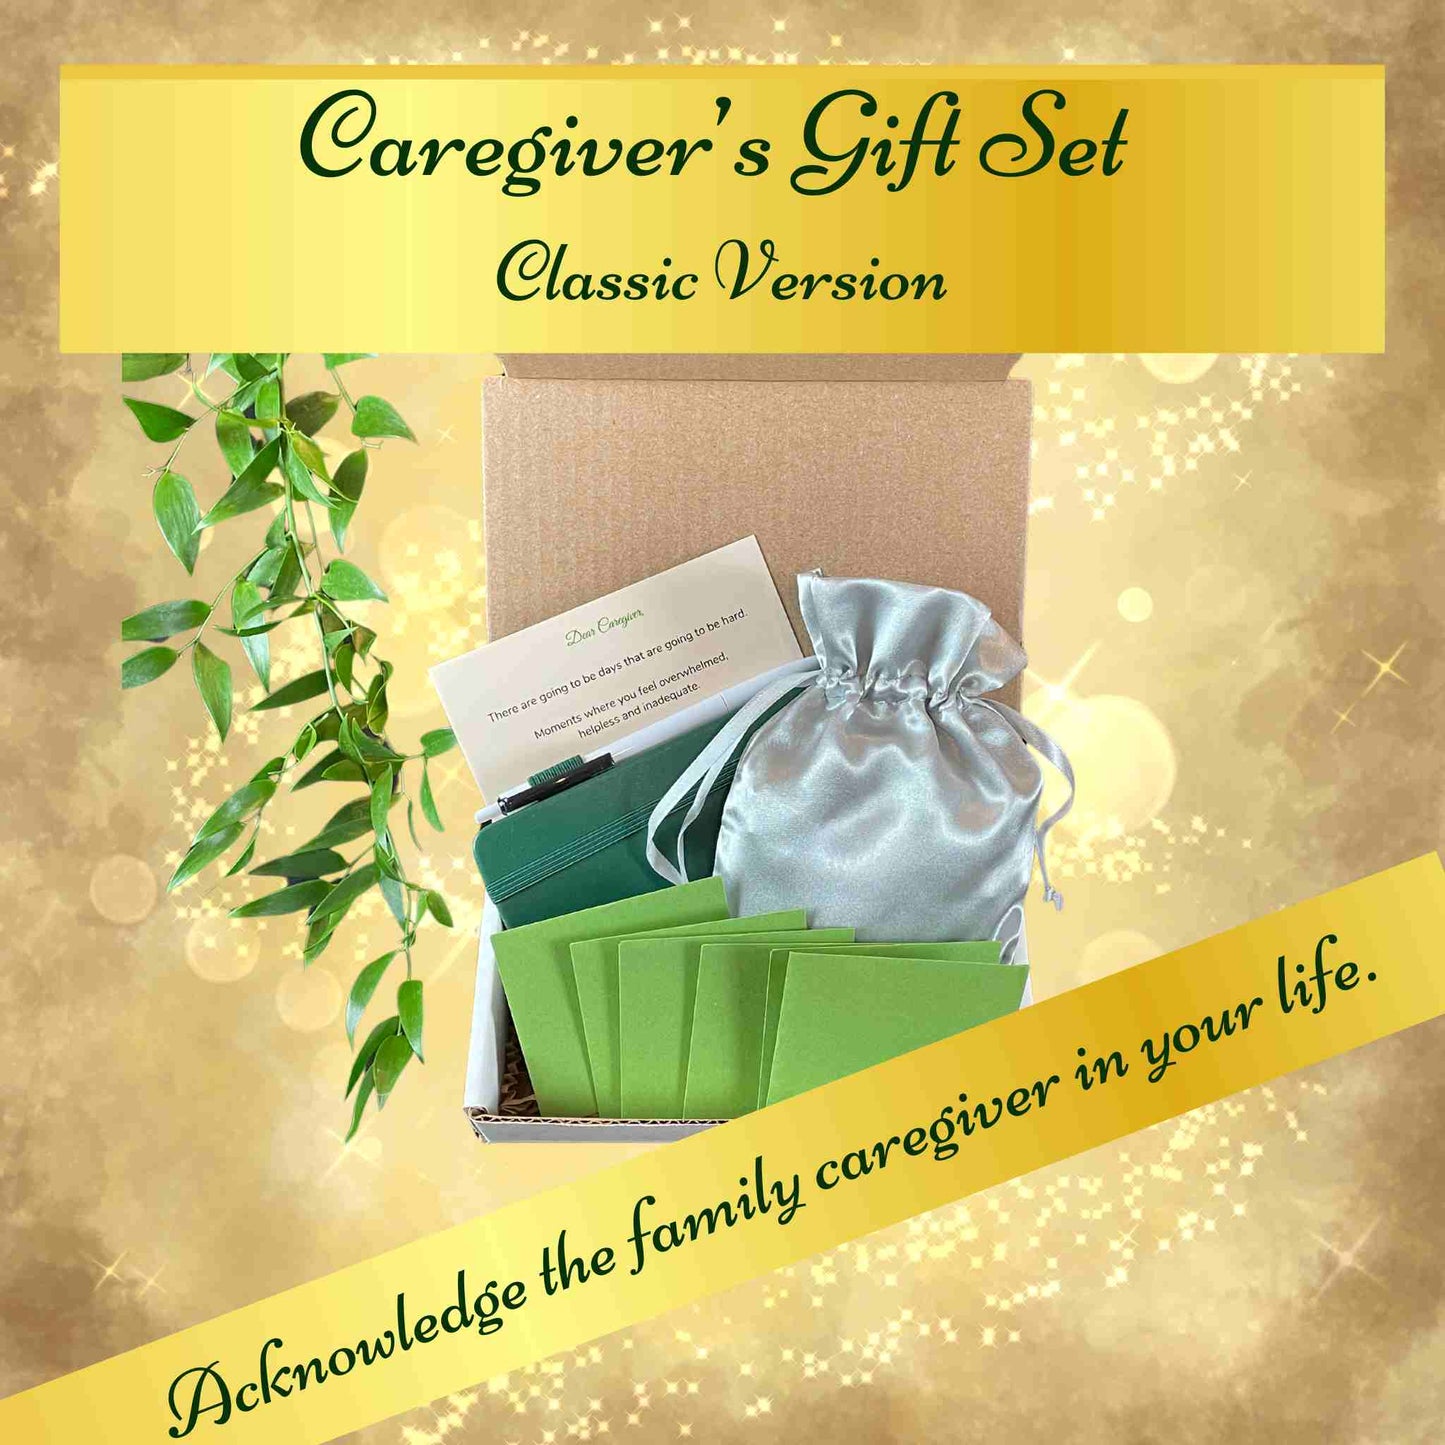 Family Caregiver Gift Set: Classic version